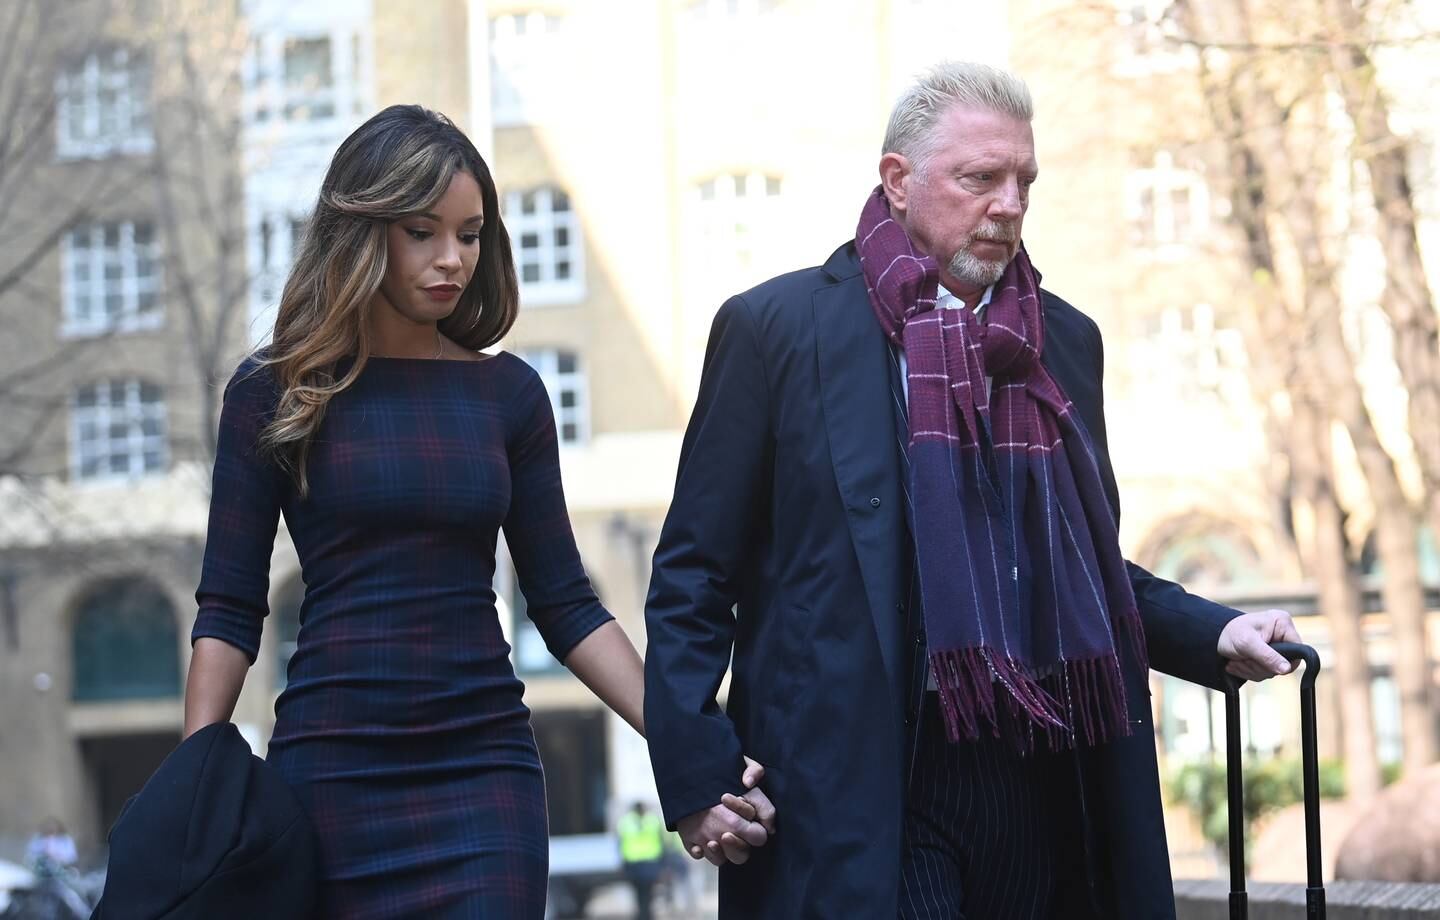 Former Wimbledon Champion and sports commentator Boris Becker arrives with his partner Lilian de Carvalho at Southwark Crown Court in London, on March 24. Becker is in court after declaring bankruptcy. EPA